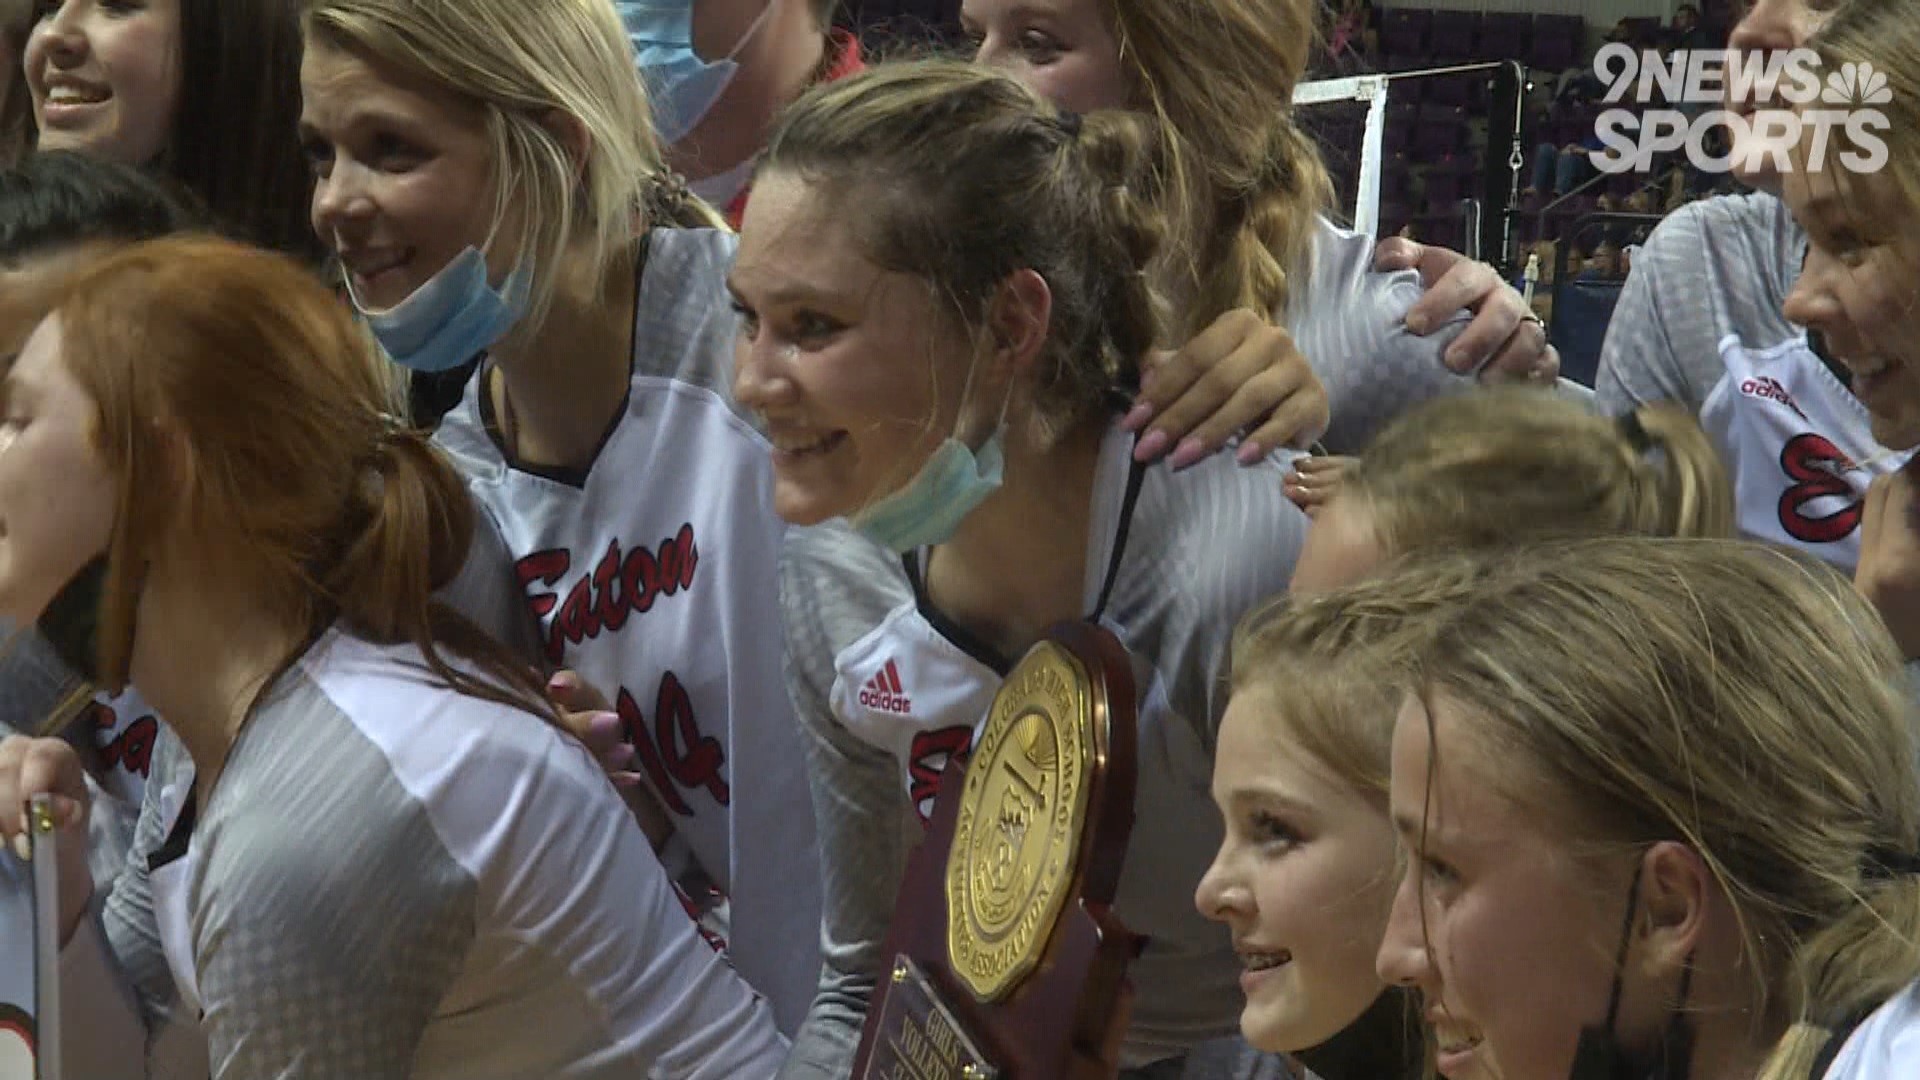 The Reds defeated Sterling on Thursday night in four sets to win yet another state title.